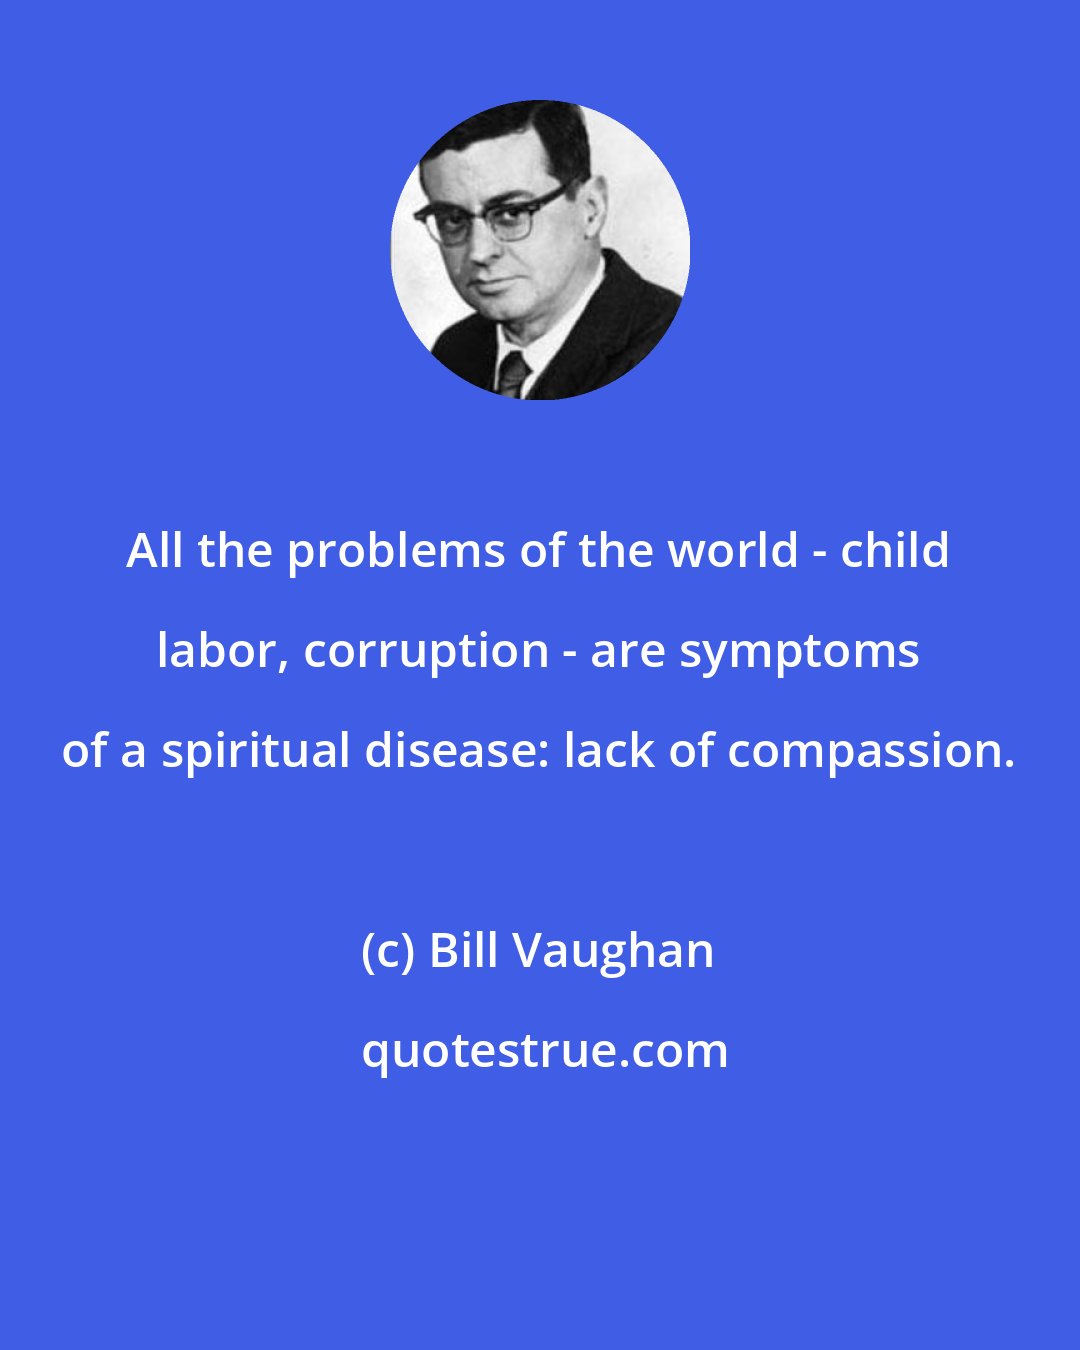 Bill Vaughan: All the problems of the world - child labor, corruption - are symptoms of a spiritual disease: lack of compassion.